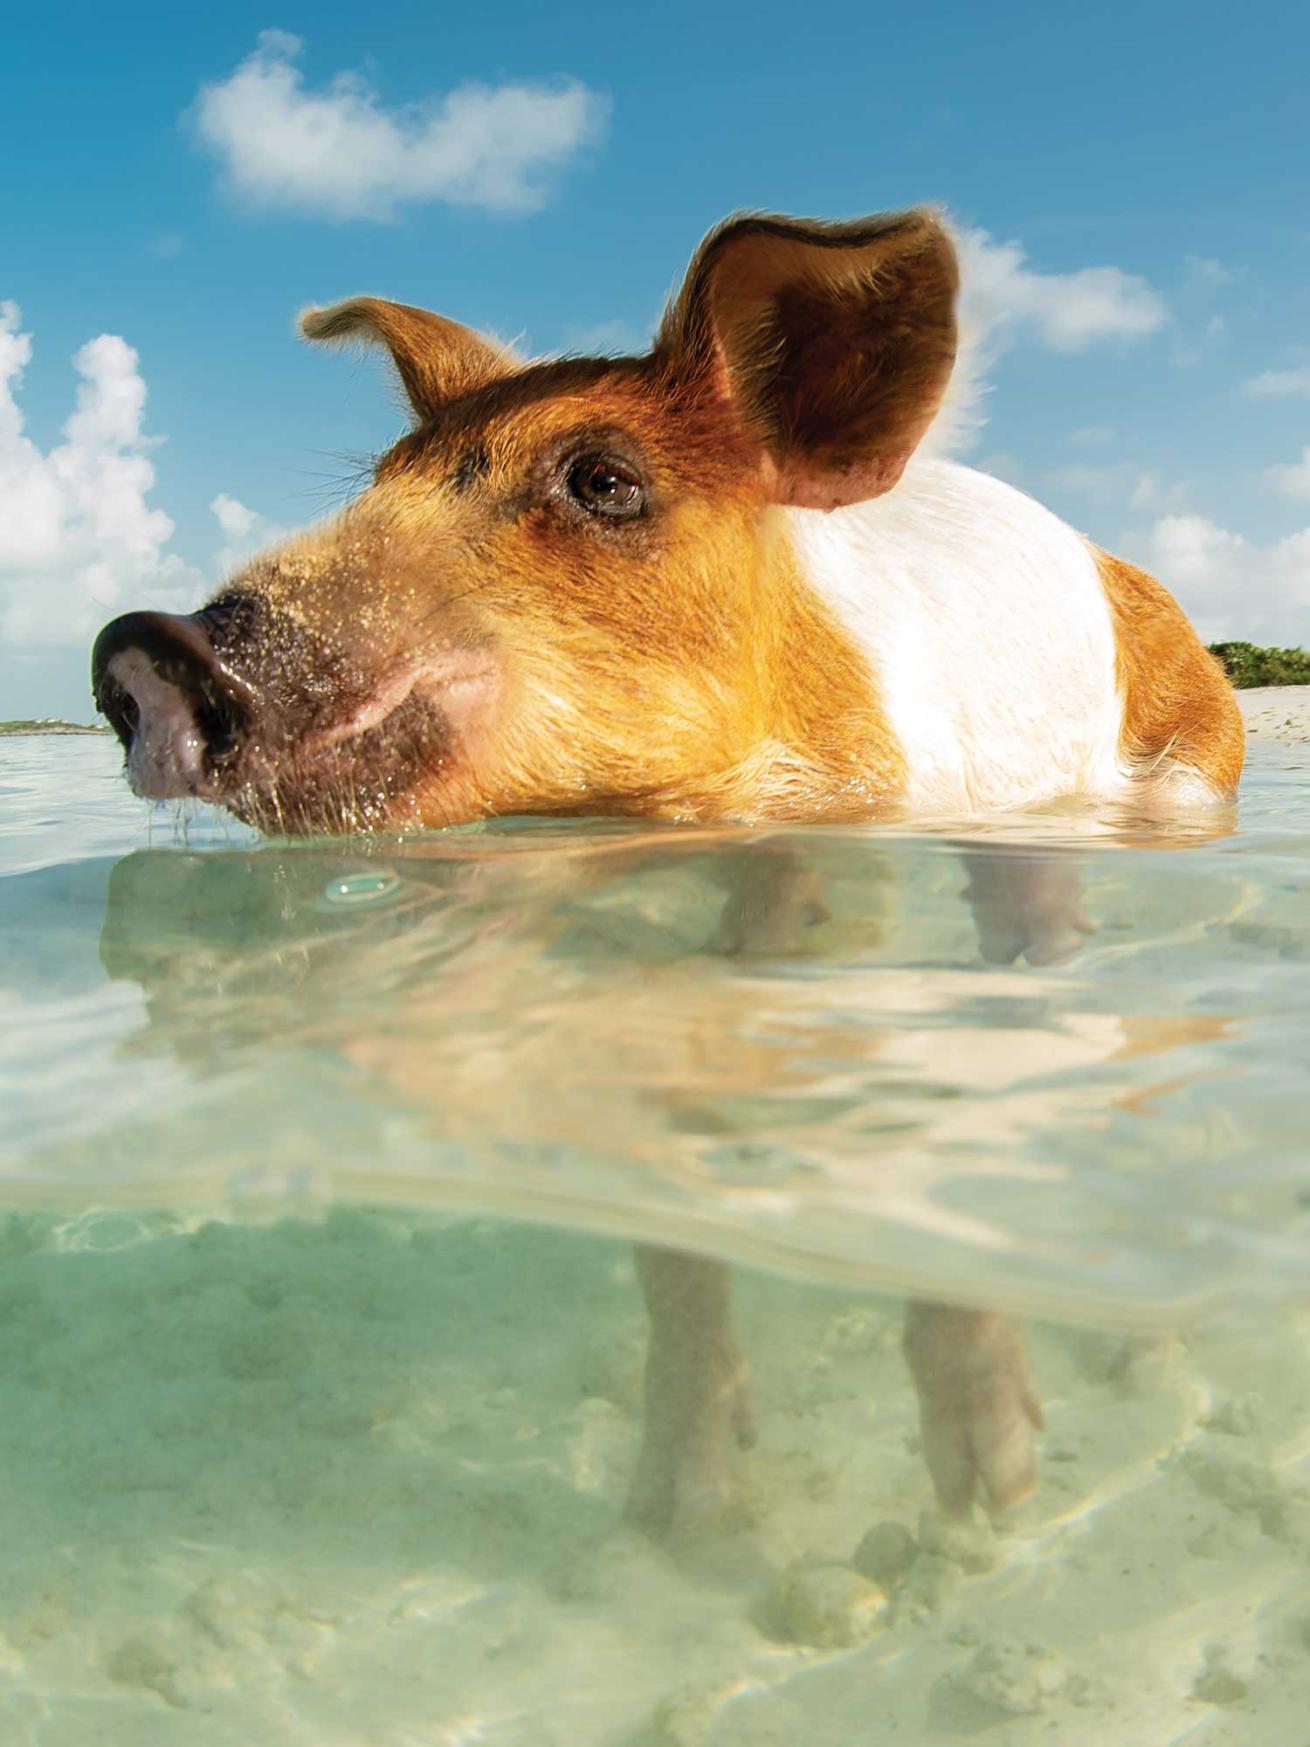 The famous swimming pigs.